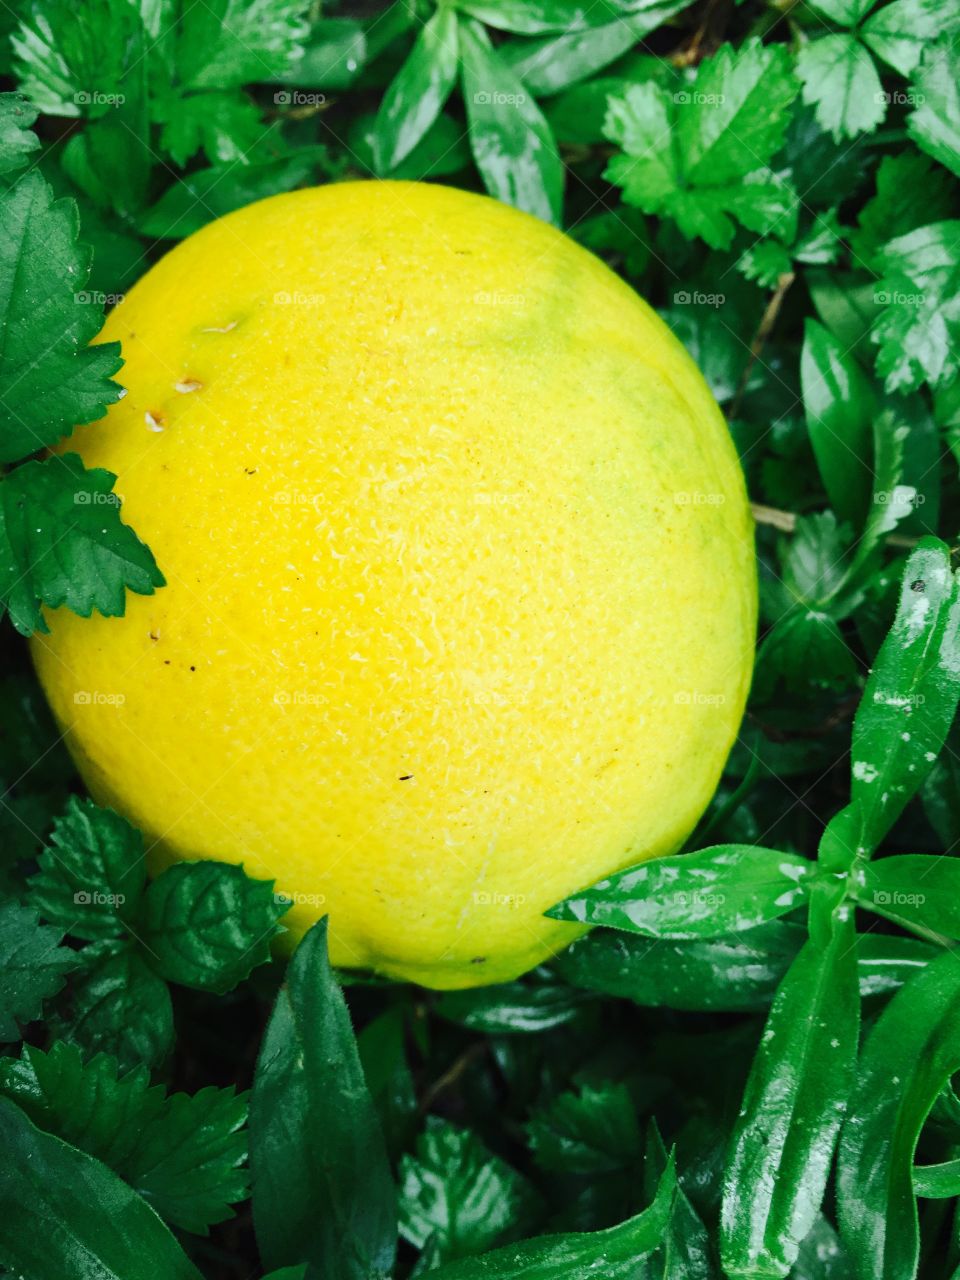 Lemon on the ground in the grass and weeds